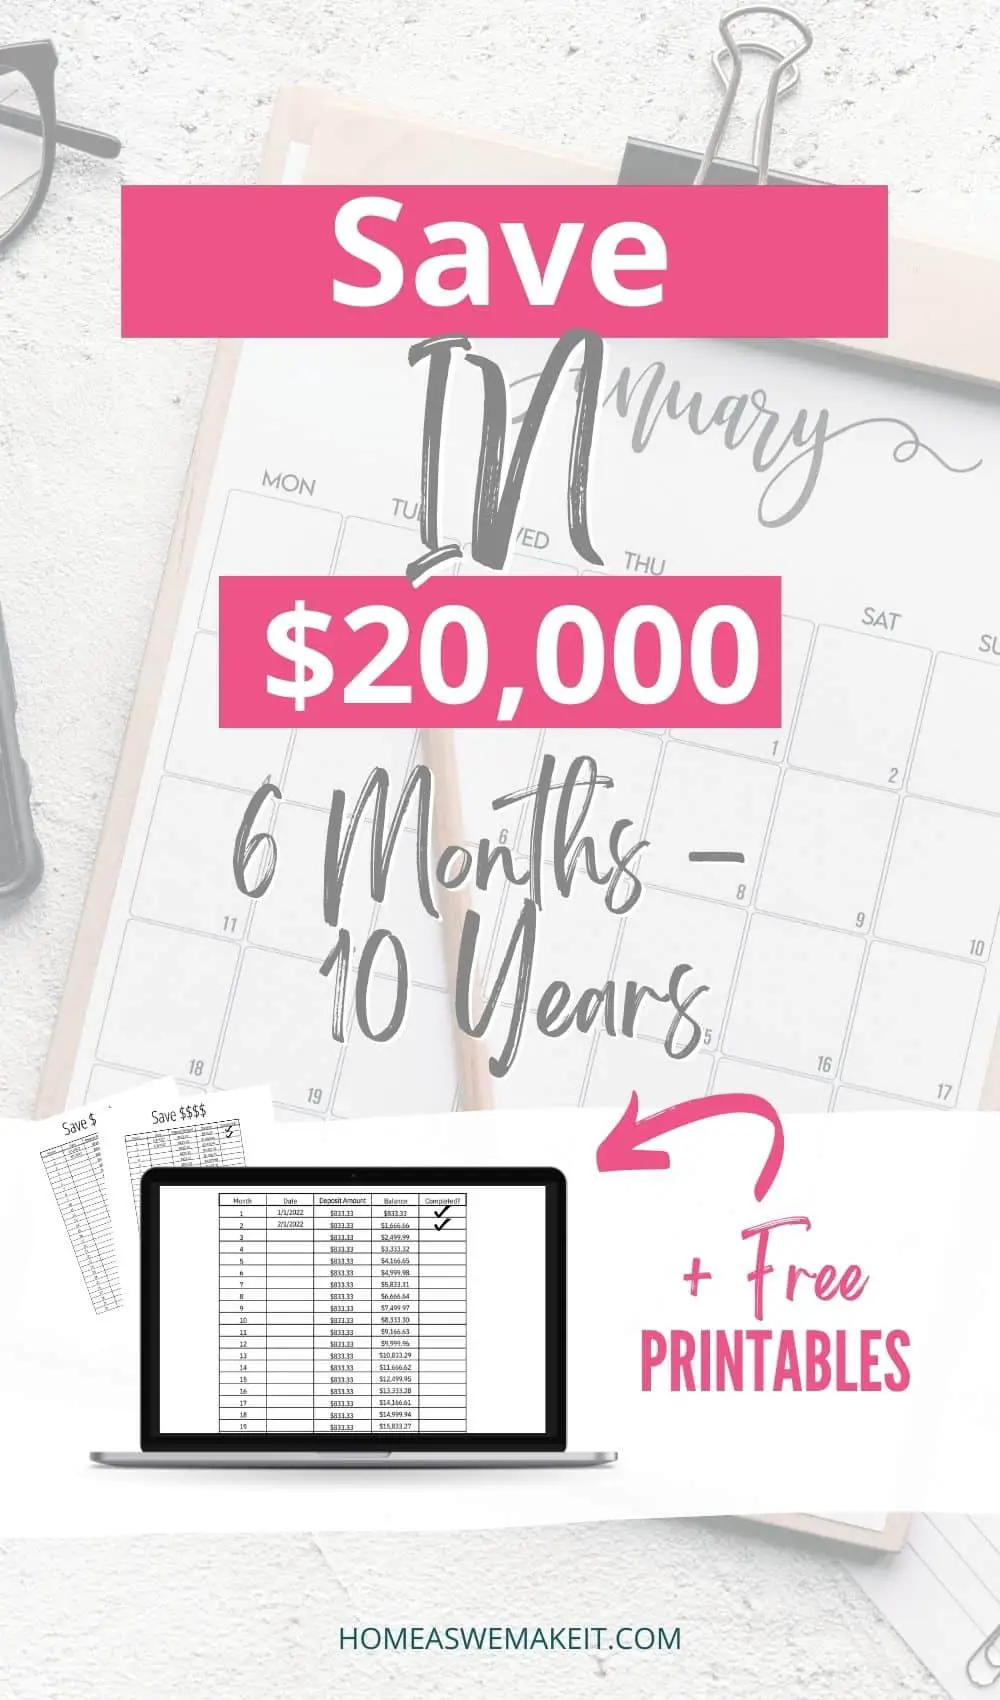 How to Save $20,000 with Money Saving Charts